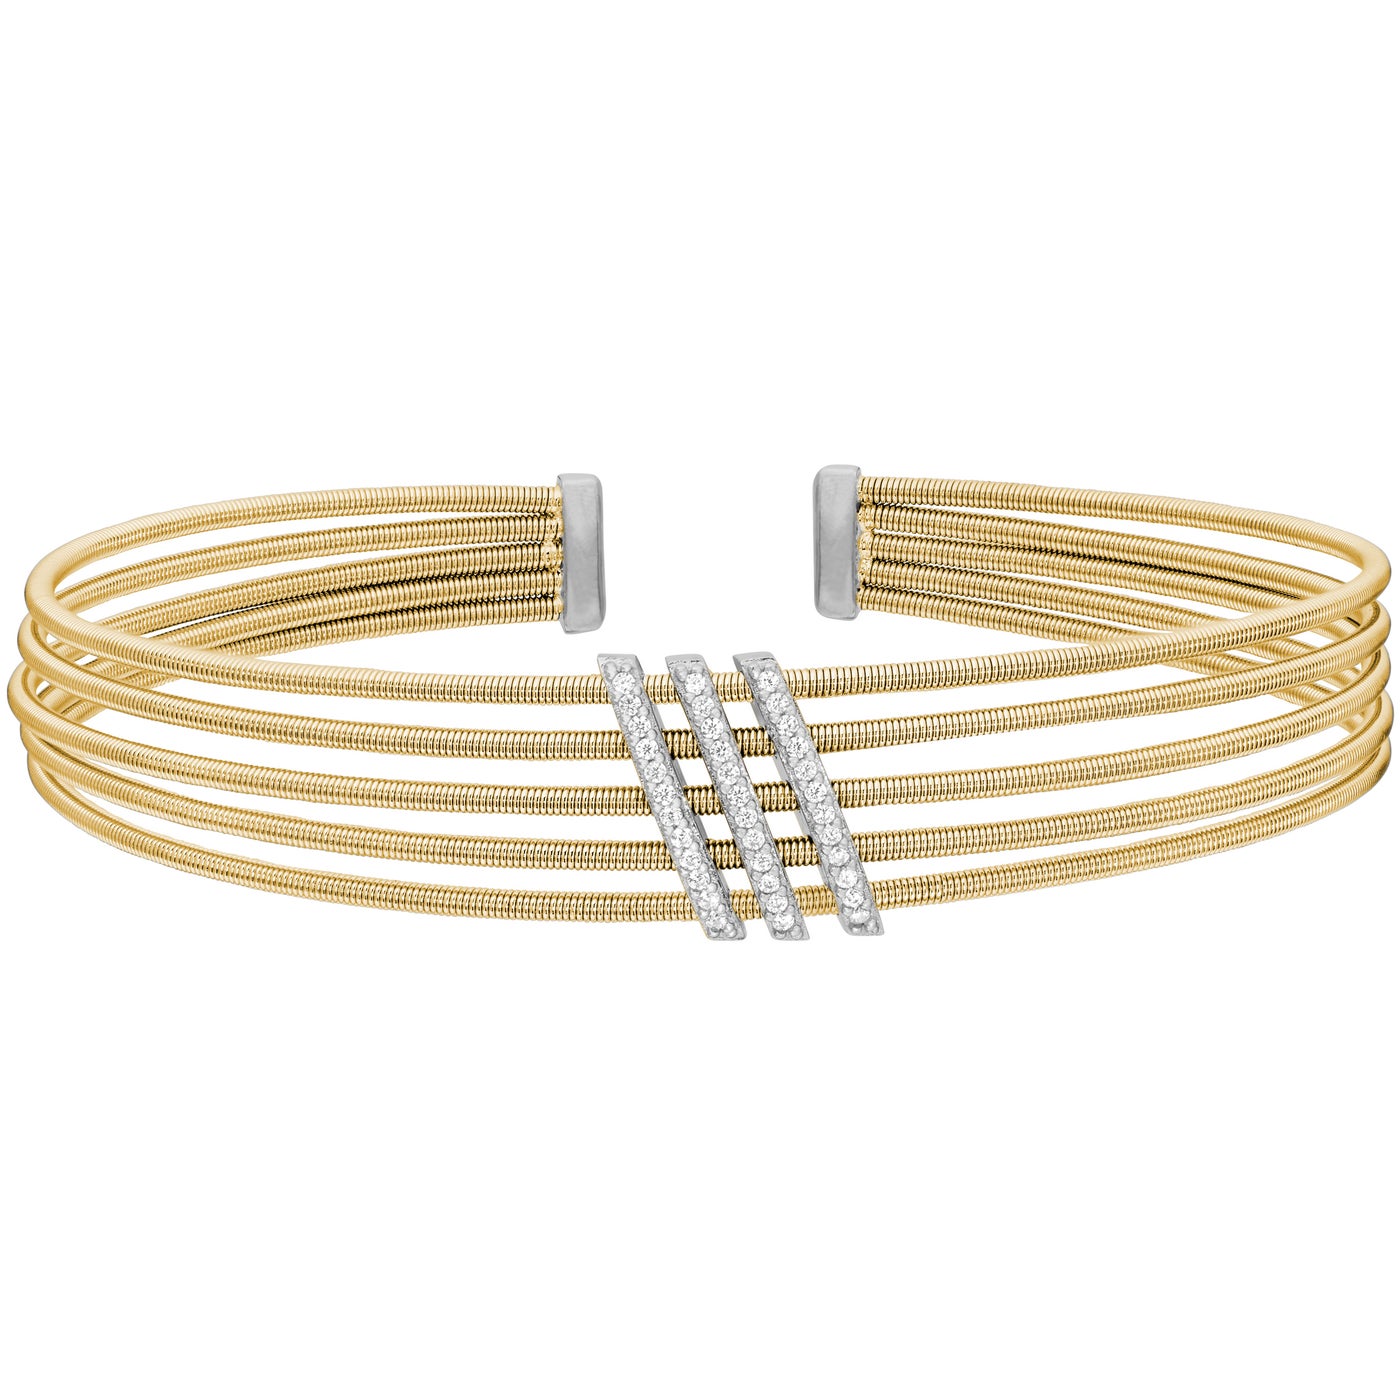 A sterling silver multi cable bracelet with three diagonal bars of simulated diamonds displayed on a neutral white background.